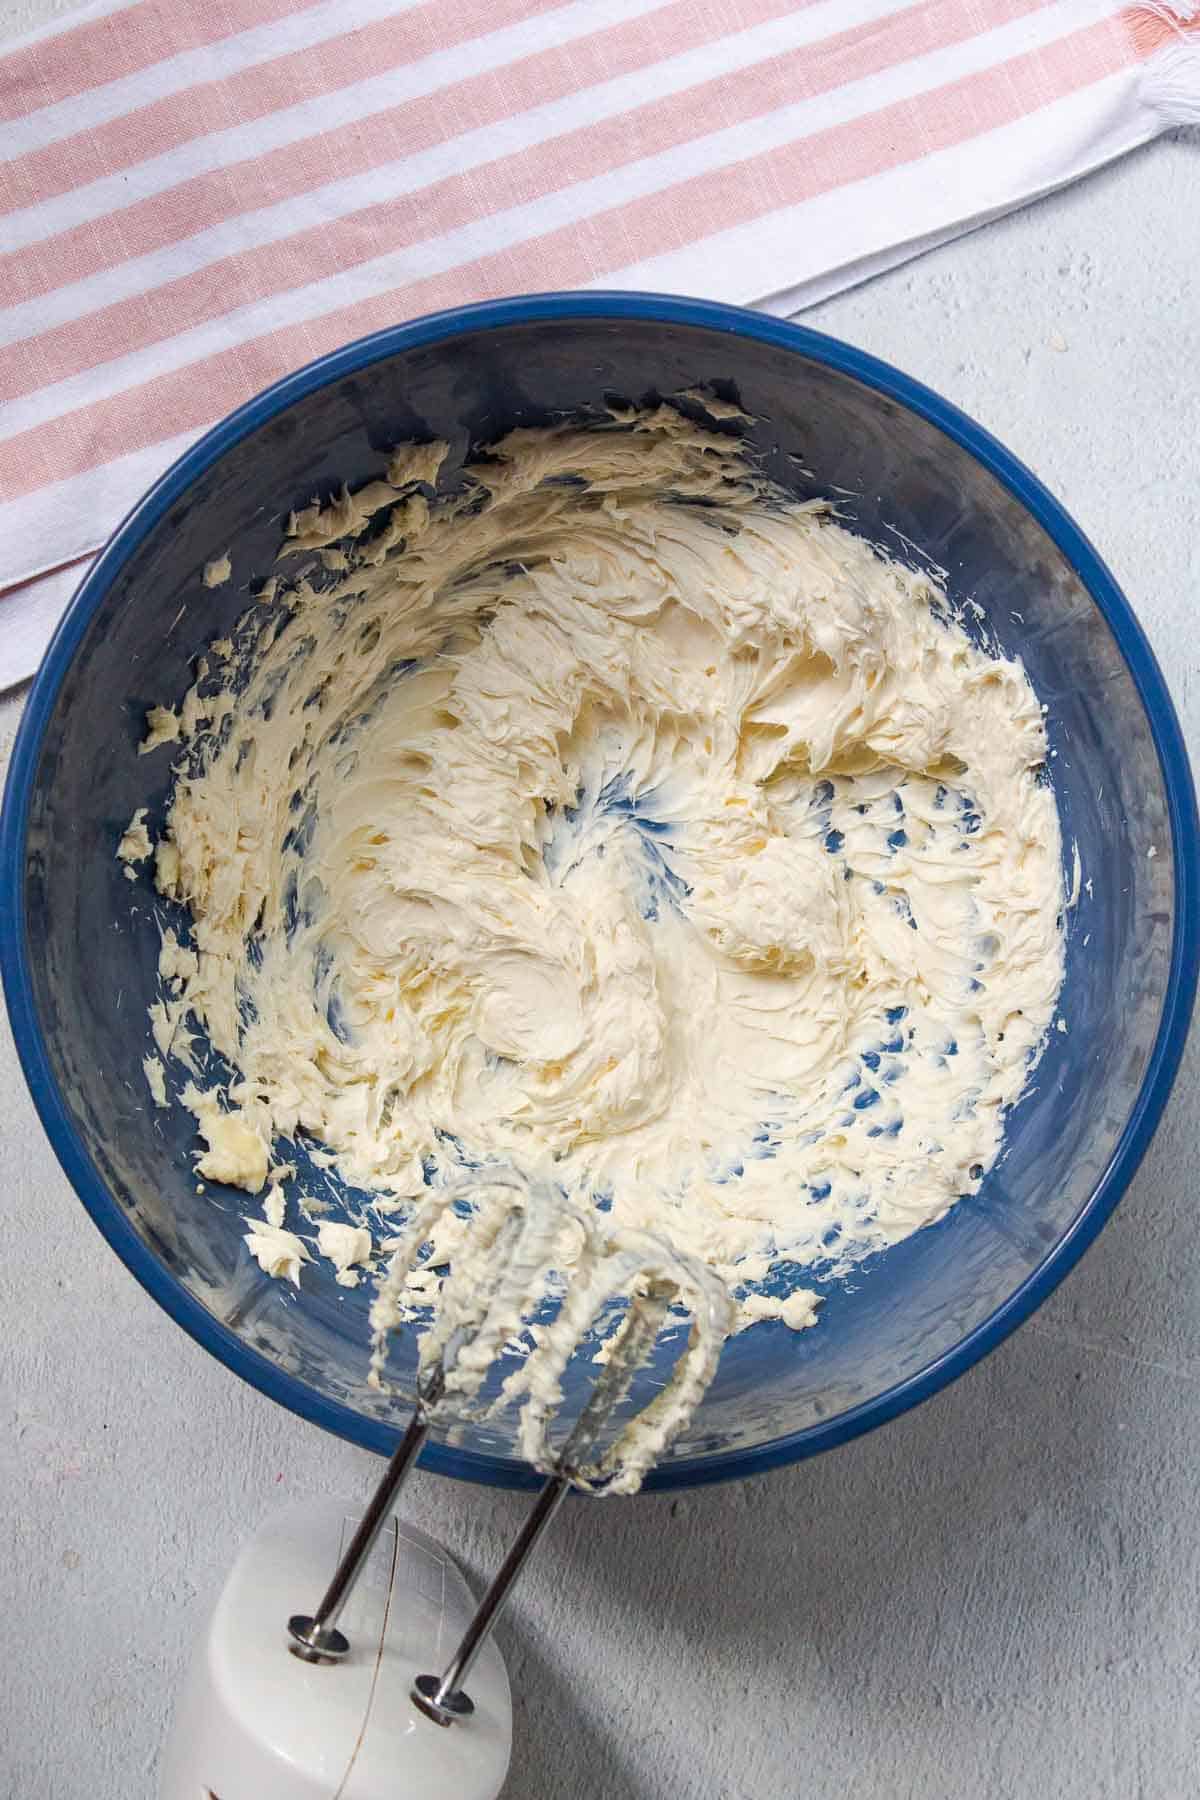 The softened cream cheese, softened butter, and vanilla are beaten together with a hand mixer in a large mixing bowl until light and fluffy